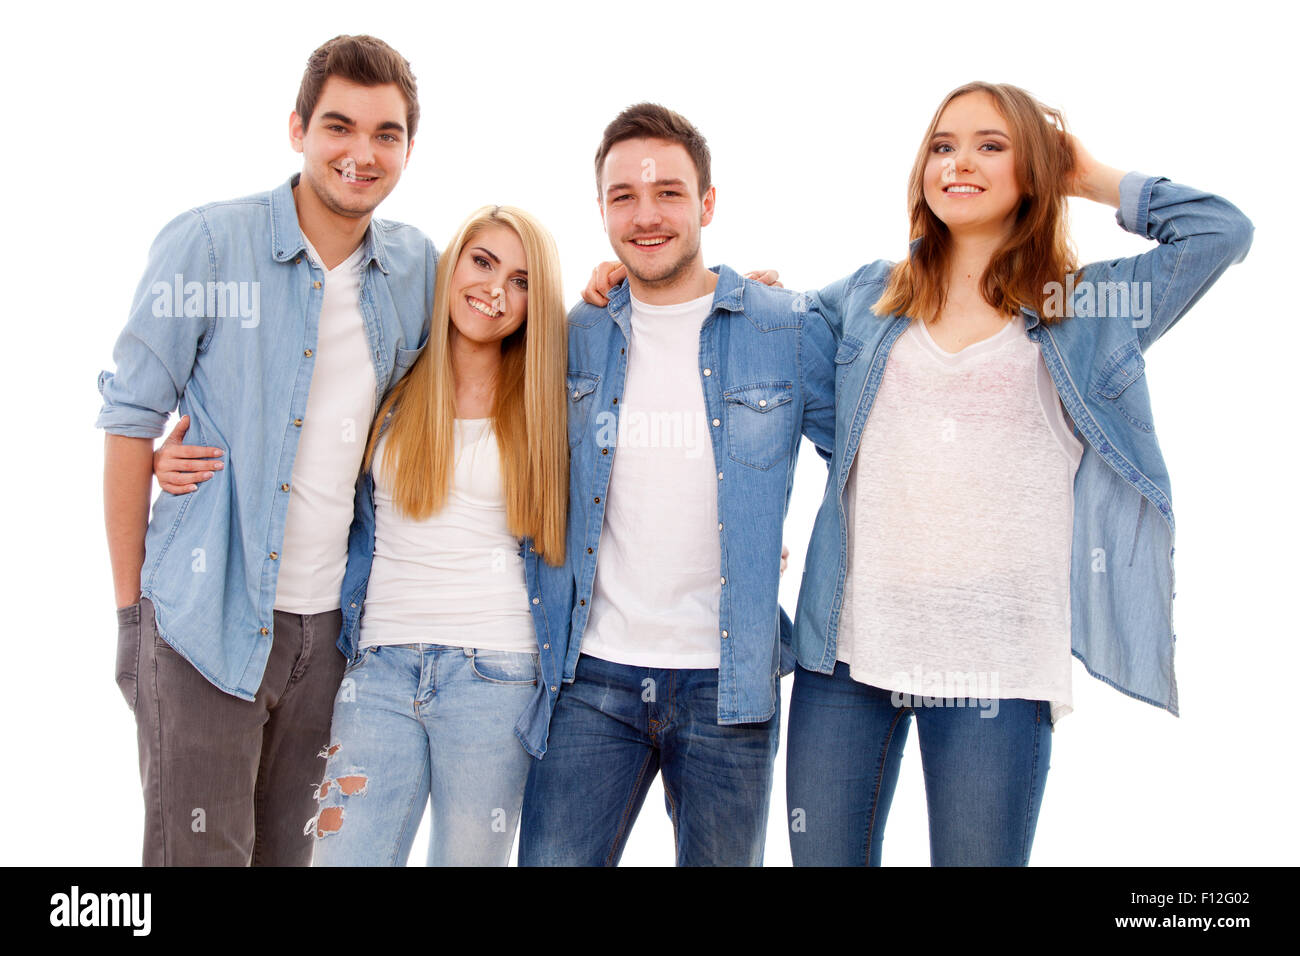 Group of happy young people Stock Photo